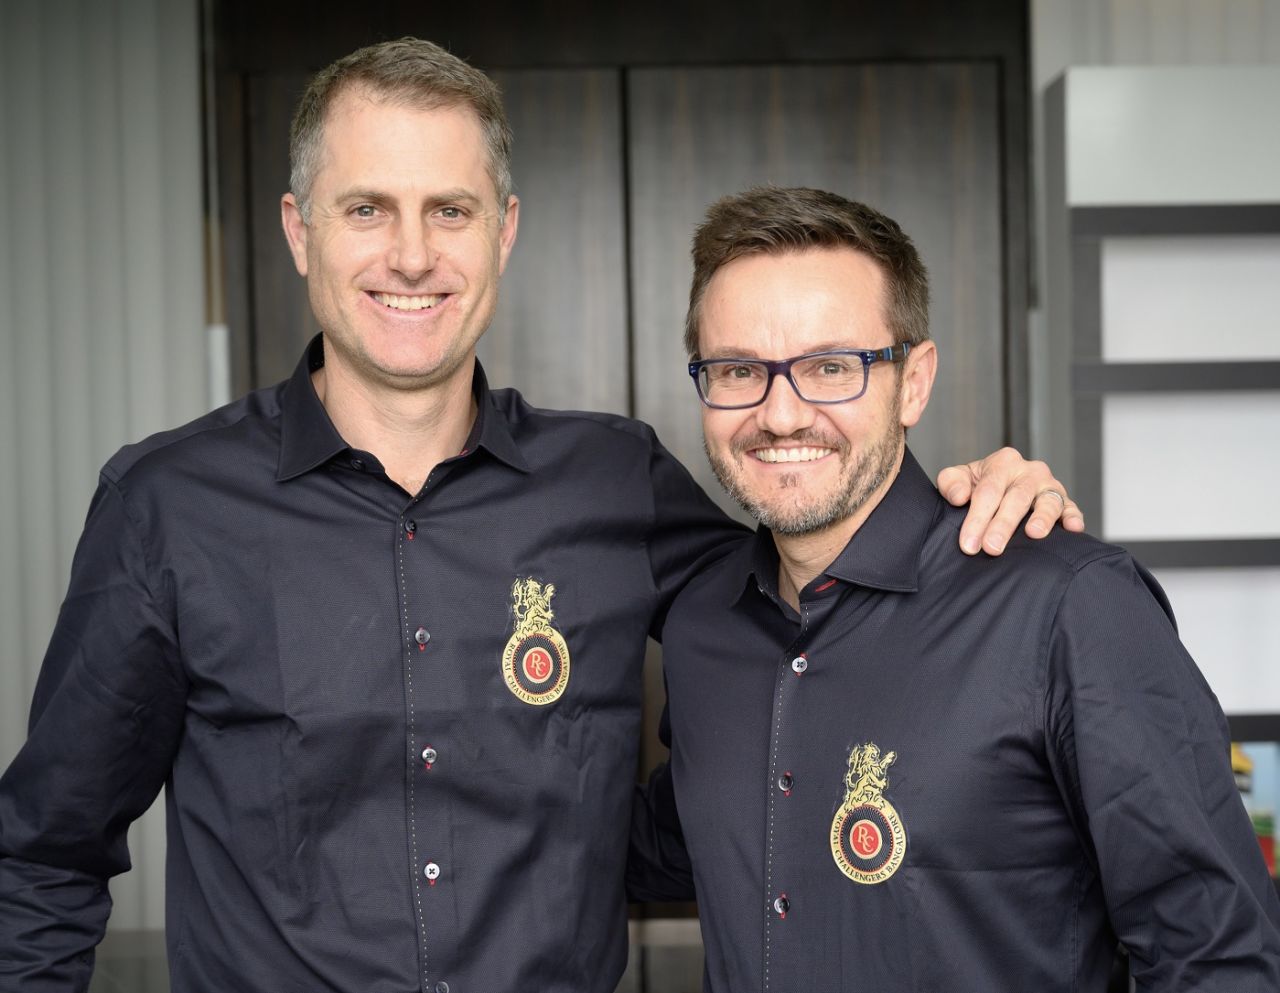 Simon Katich and Mike Hesson strike a pose, Bangalore, September 19, 2019